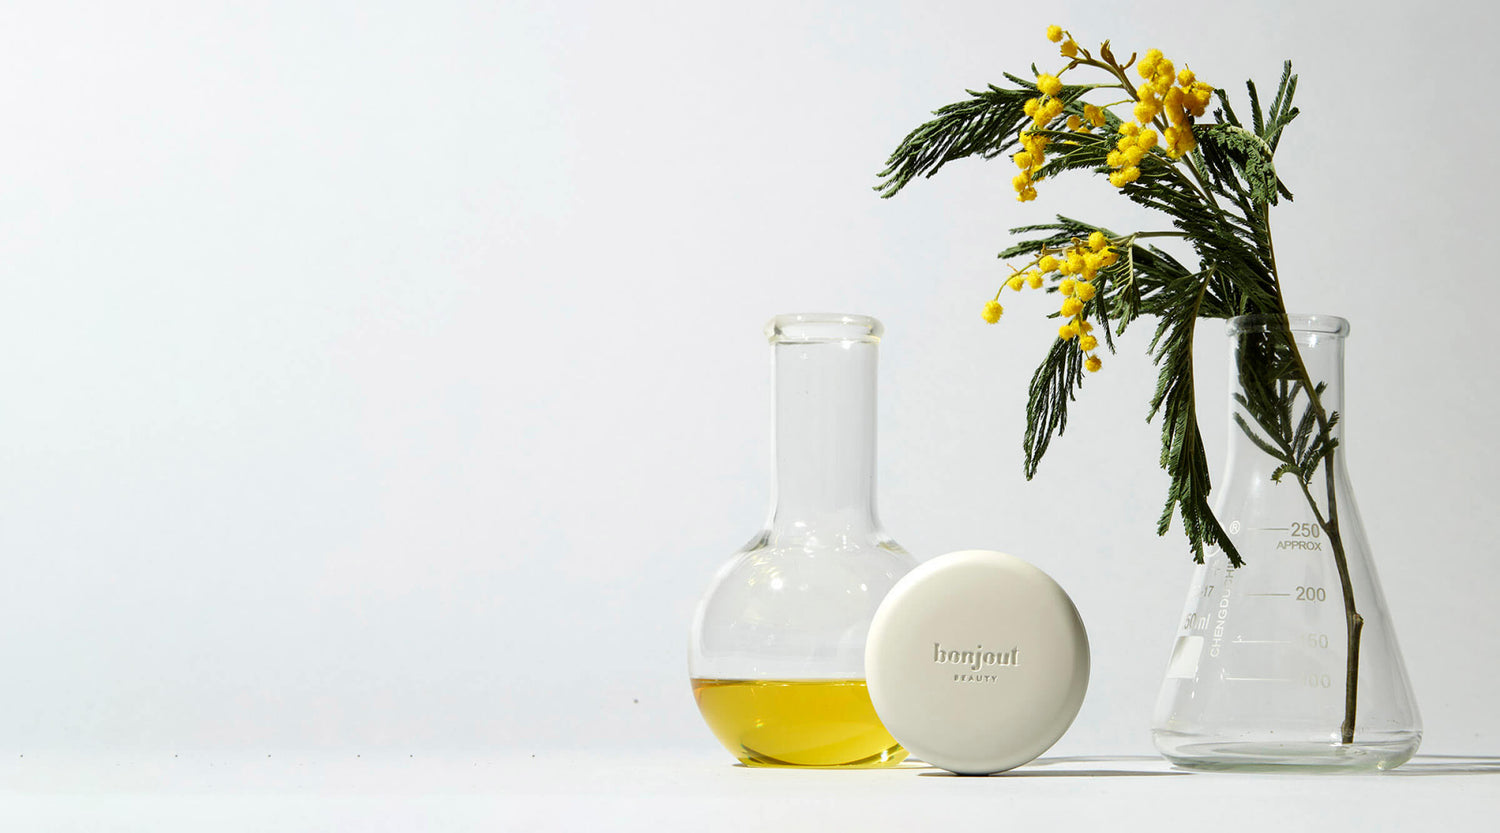 Bonjout Beauty's Le Balm product with beaker filled with oil and yellow flowers